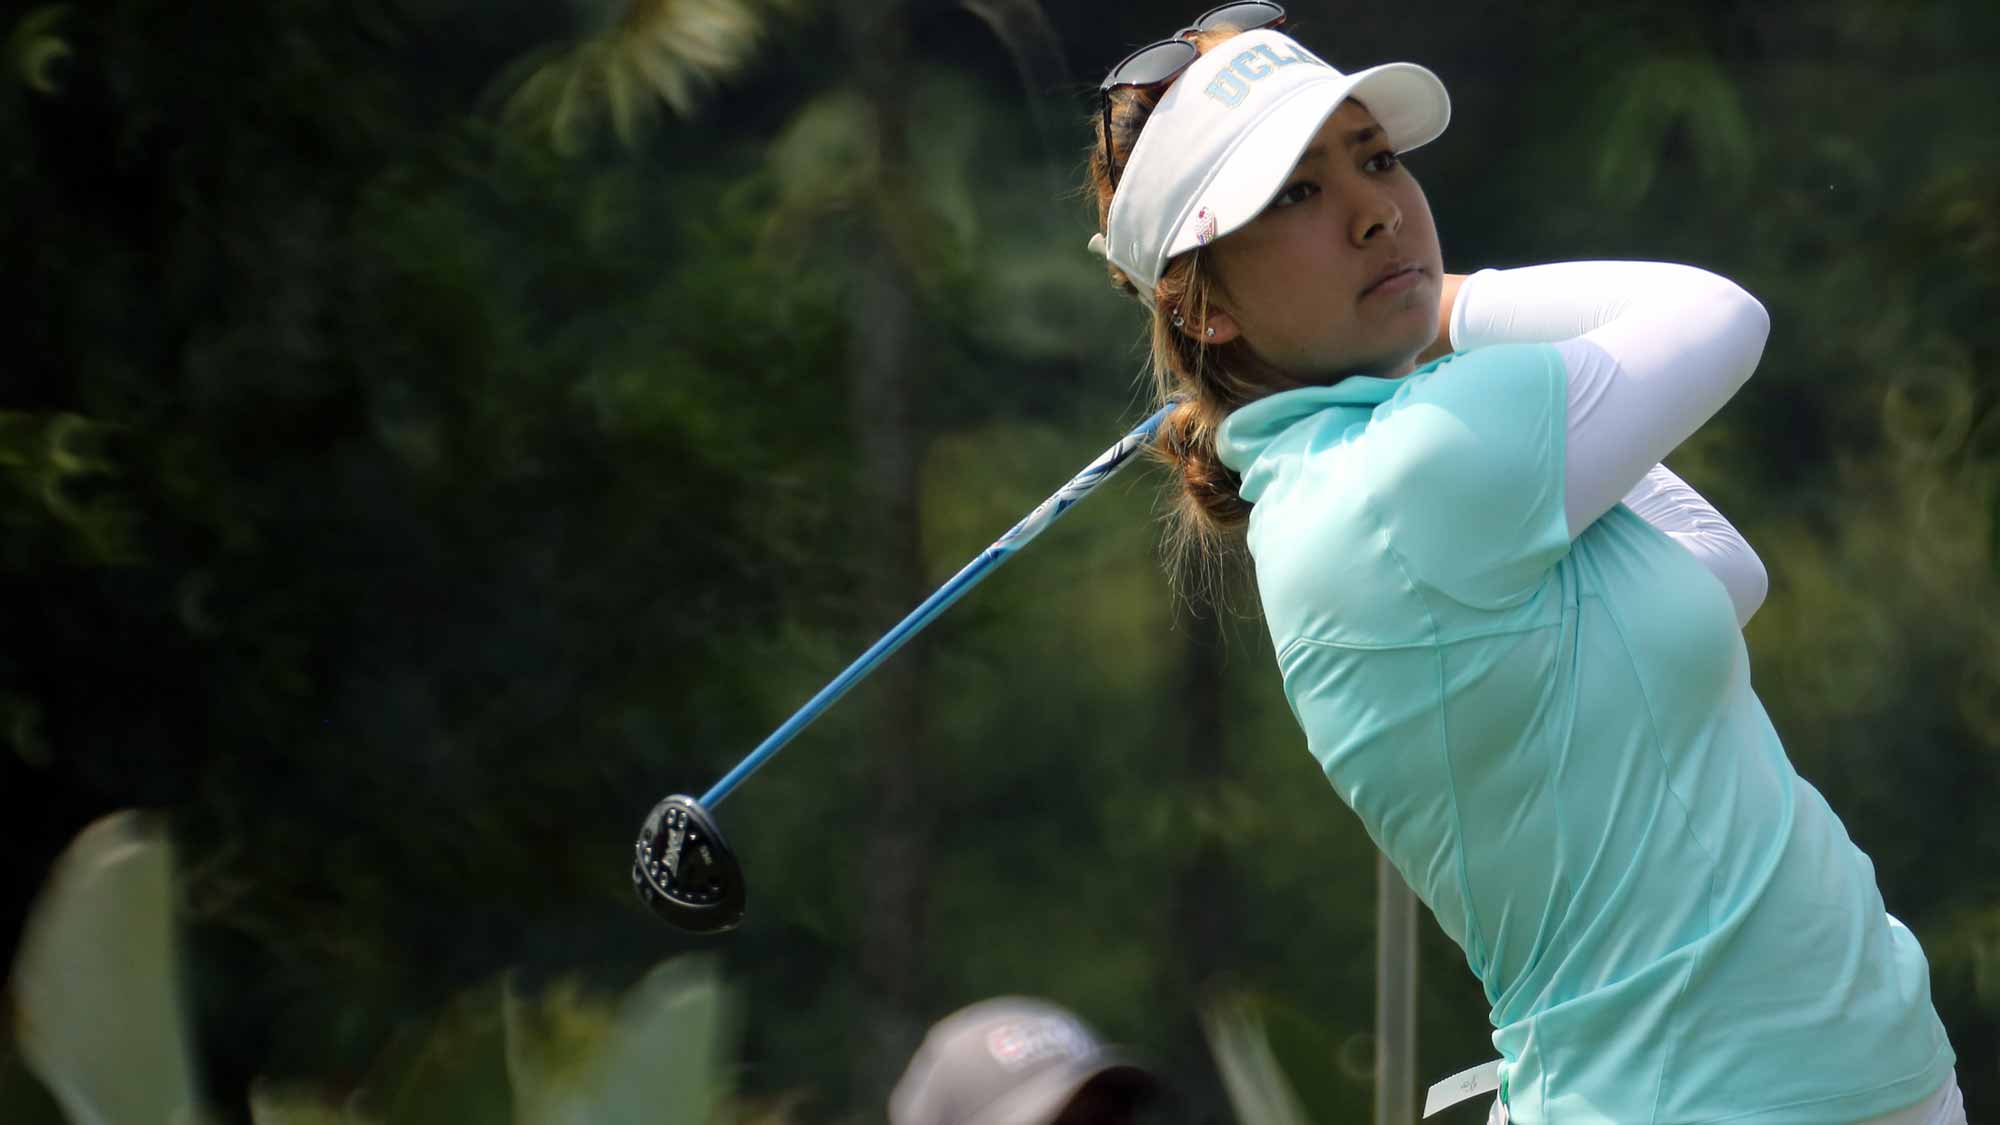 Alison Lee of USA plays her tee shot on the 4th hole during round two of the Sime Darby LPGA Tour at Kuala Lumpur Golf & Country Club